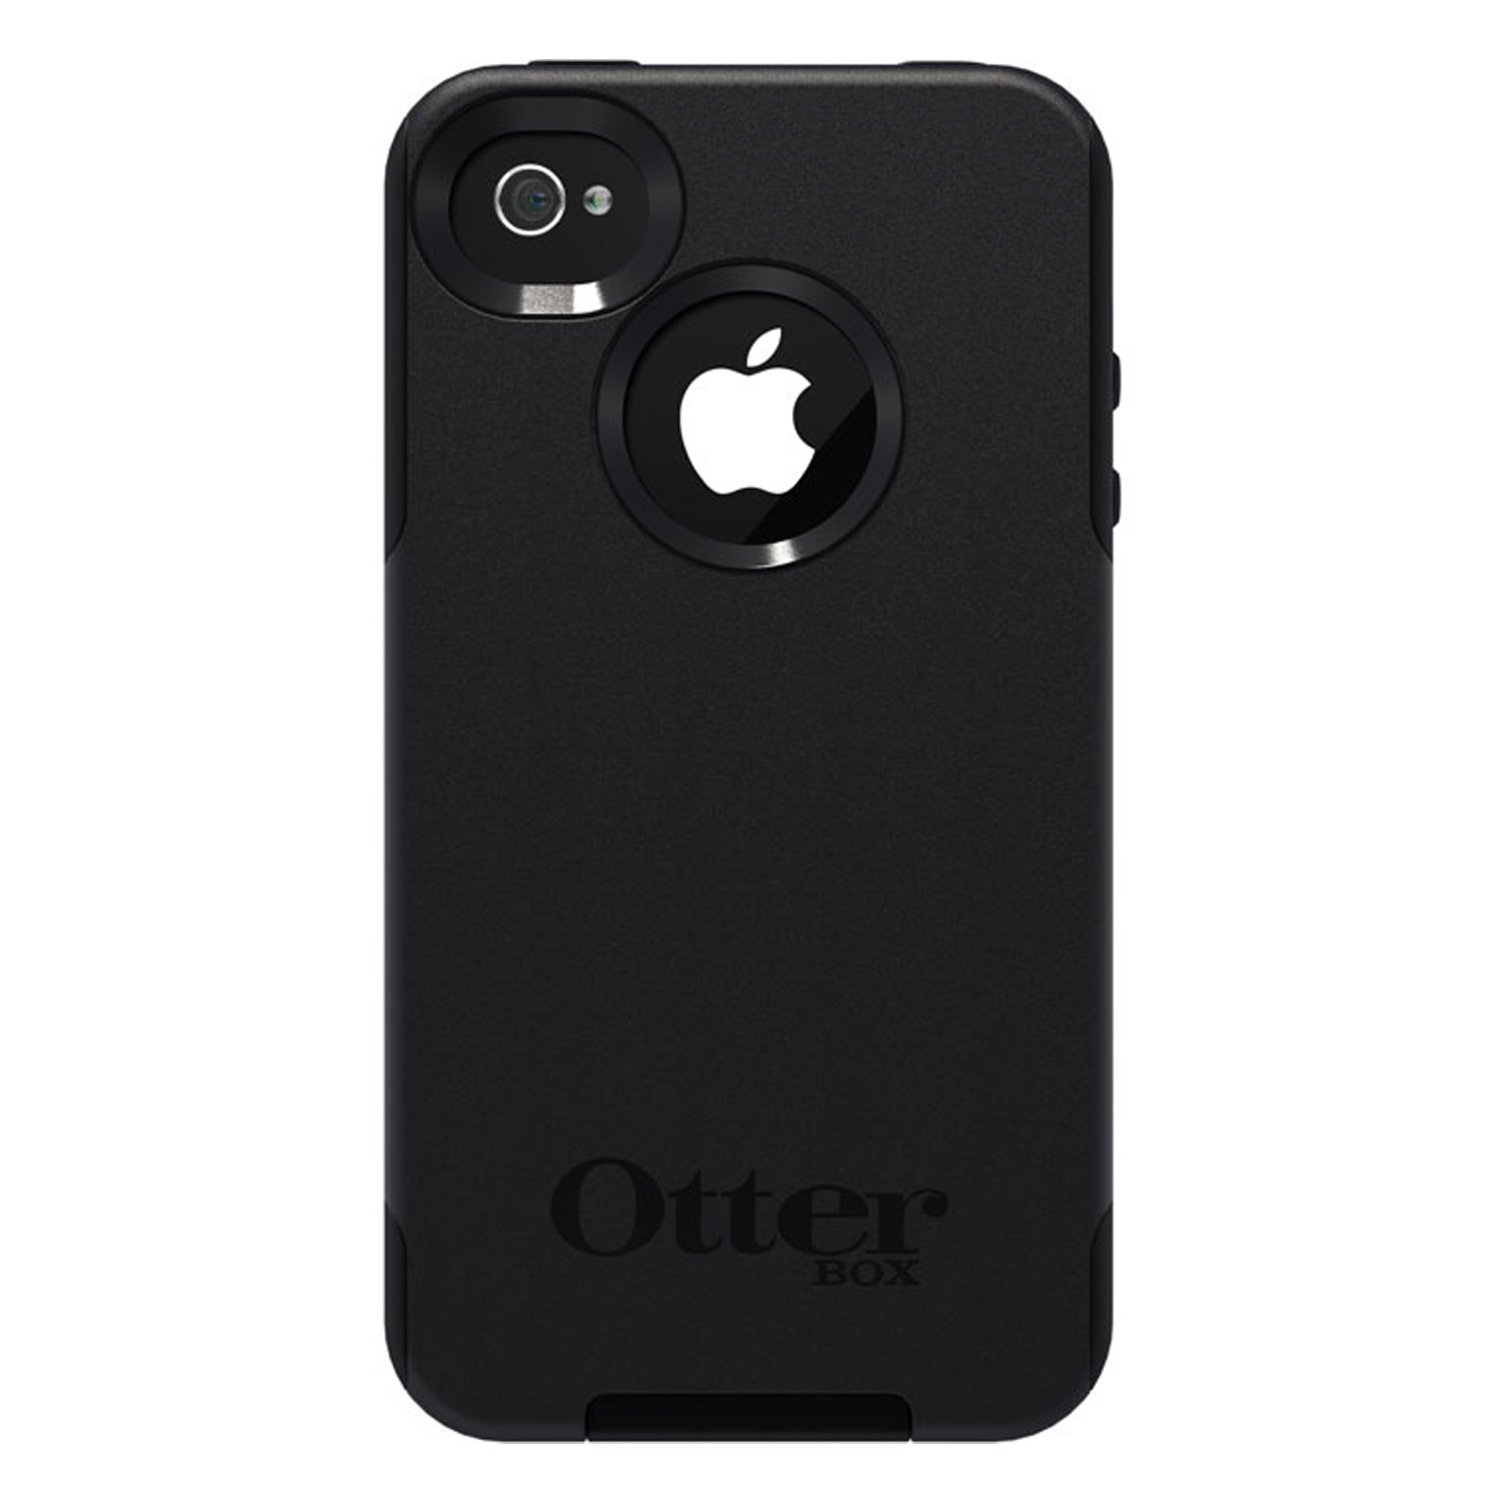 Otterbox Commuter Series Hybrid Case for iPhone 4 and 4S (Black) $16.10